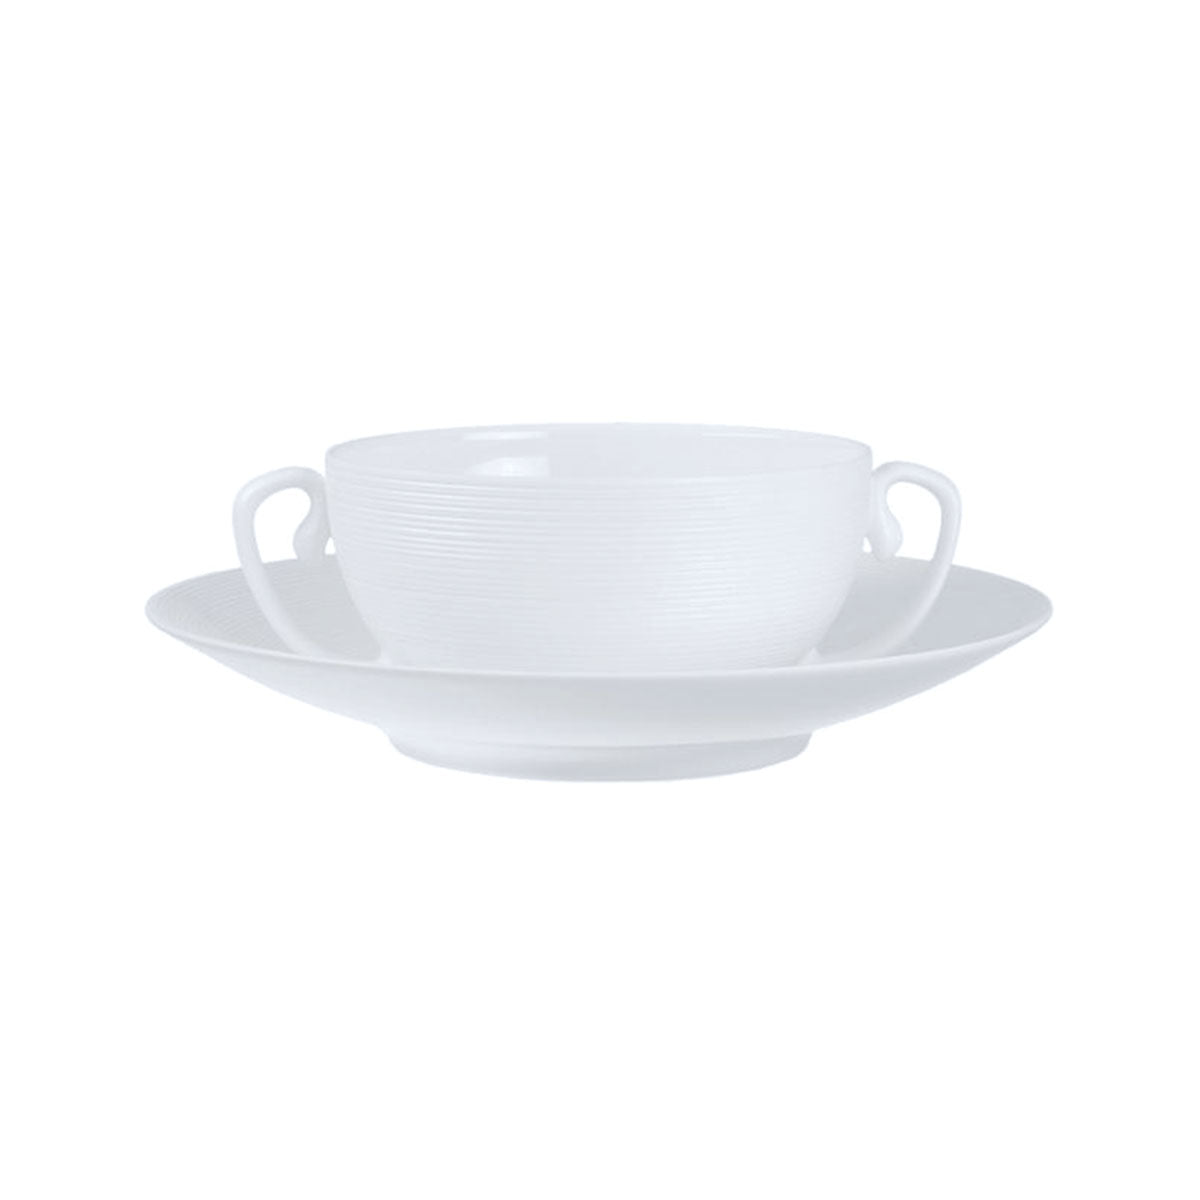 HEMISPHERE White Satin - Cream soup cup with saucer